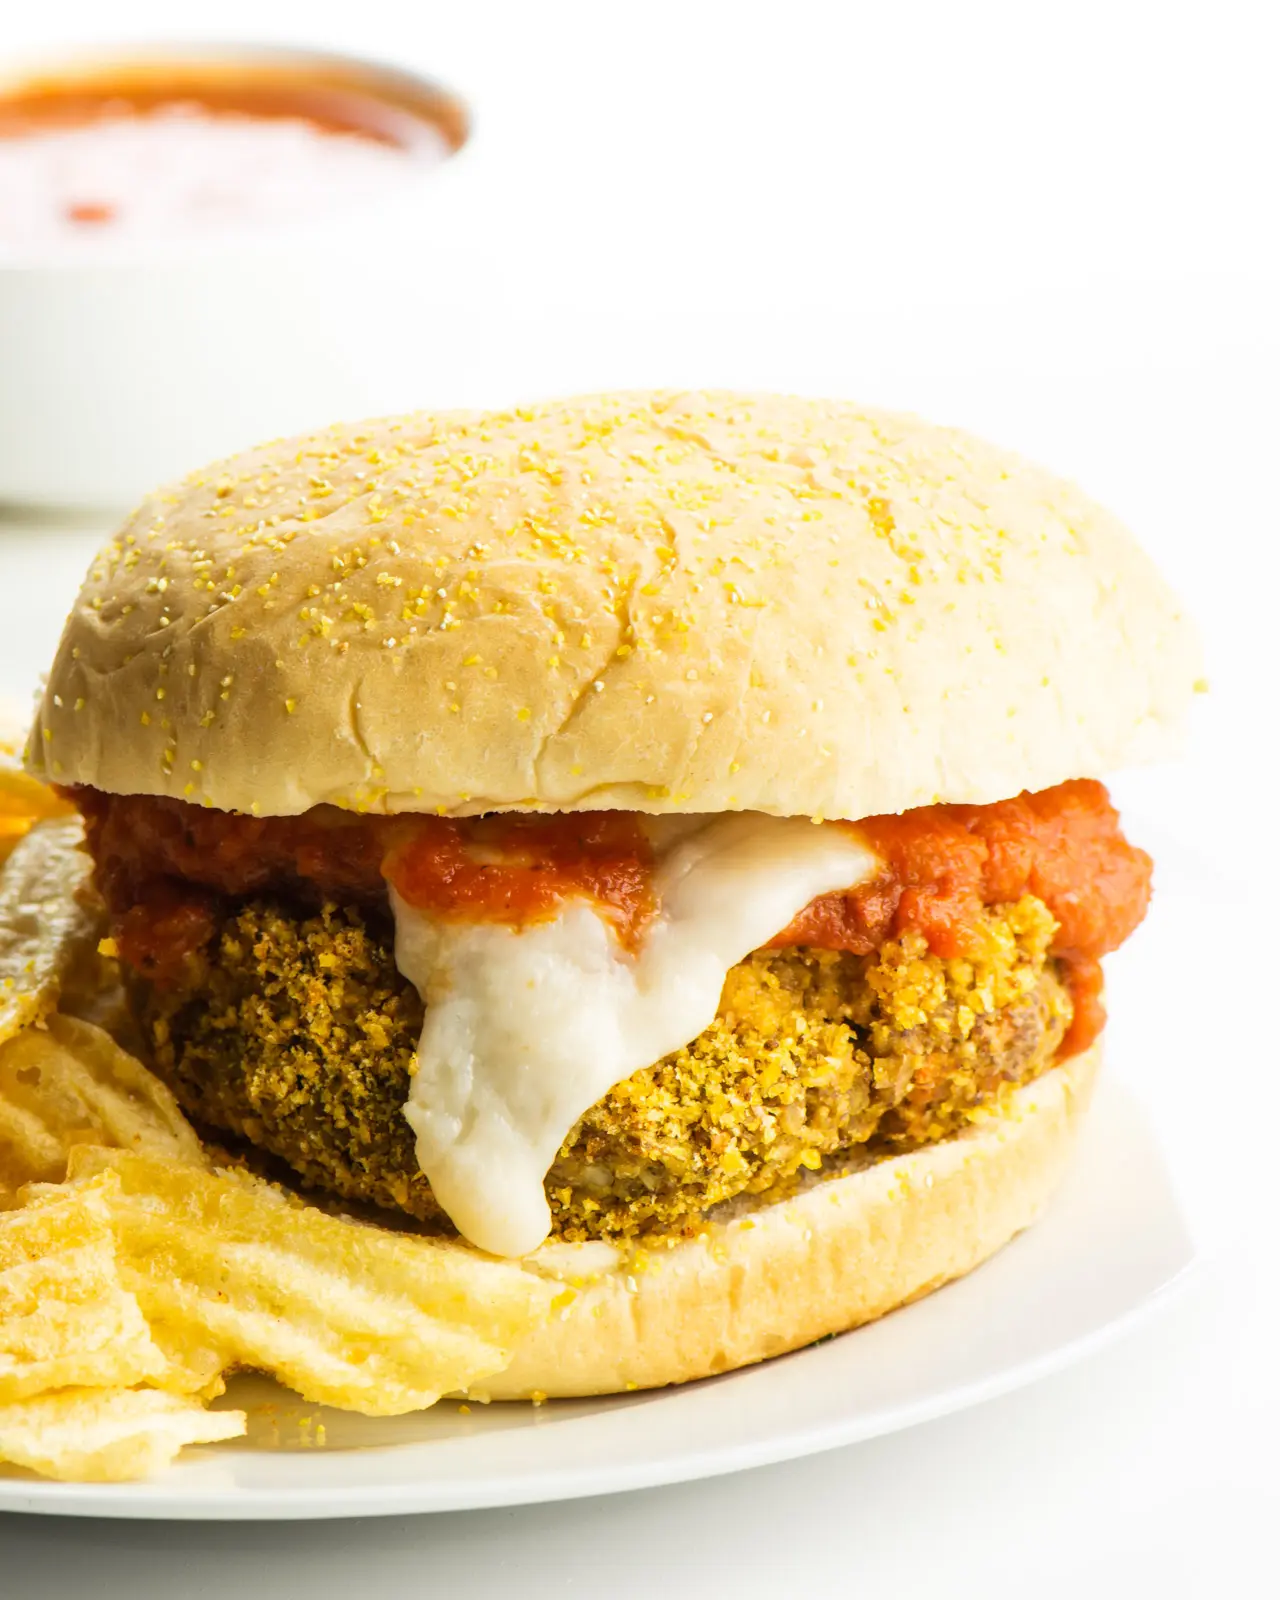 A vegan parmesan sandwich sits on a white plate with chips beside it and marinara sauce in a bowl behind it.